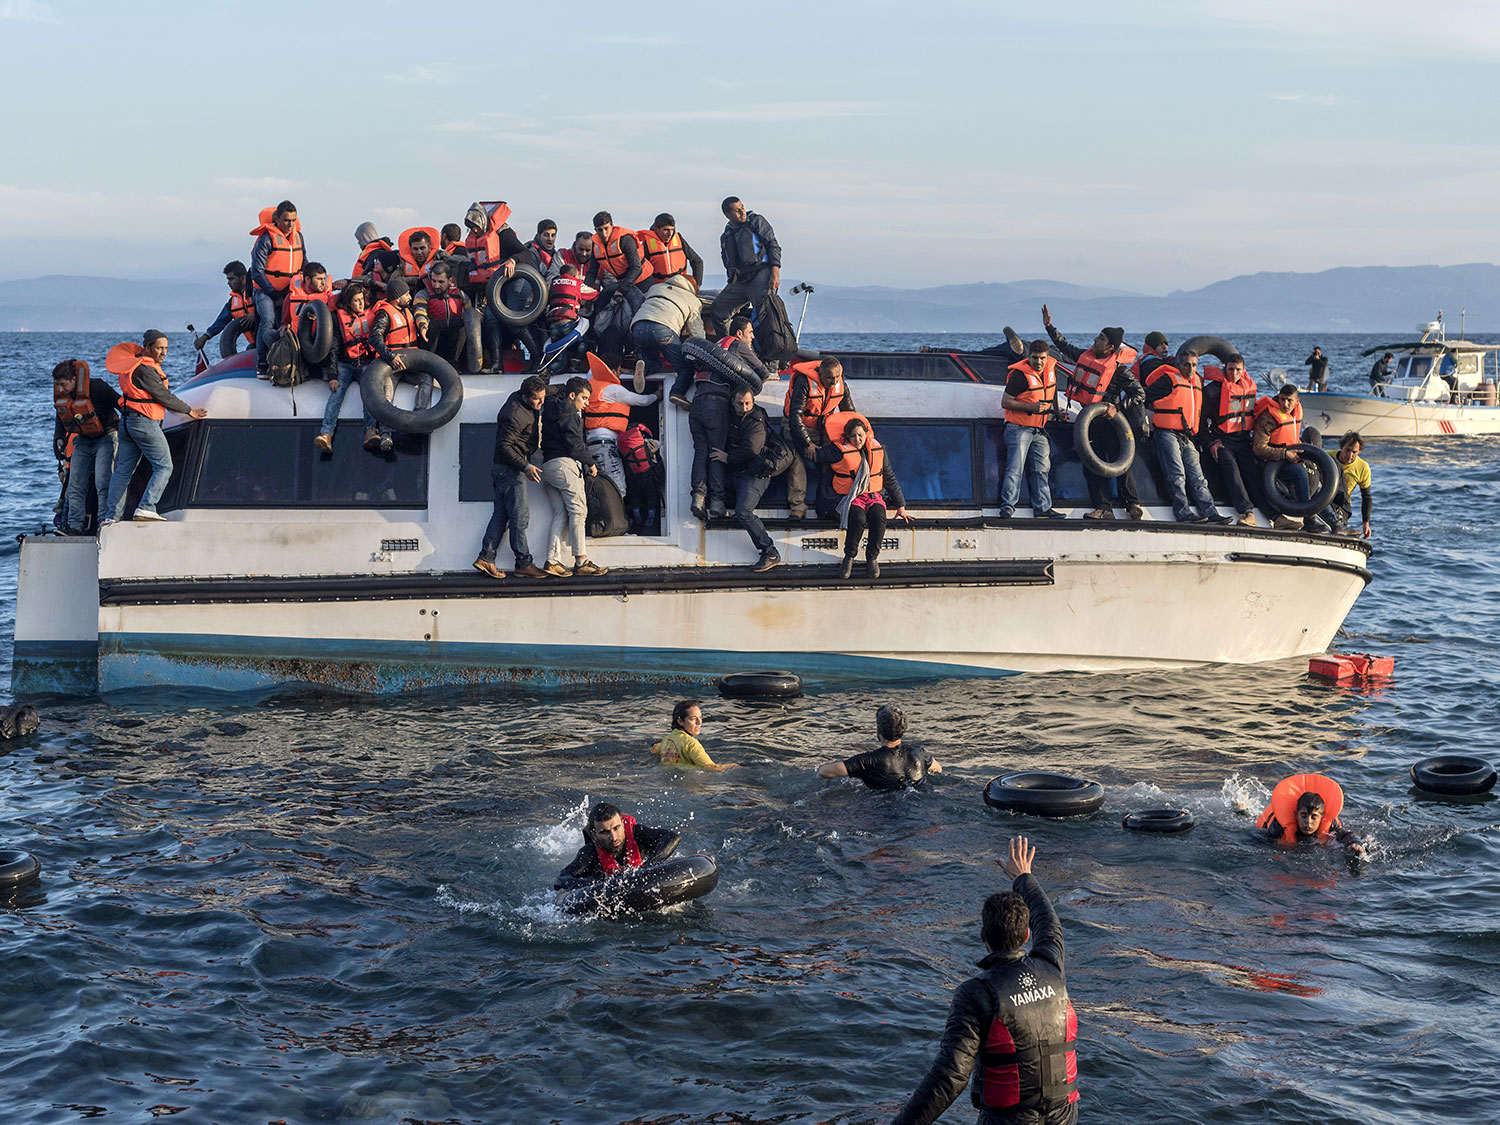 20151030_Syrians_and_Iraq_refugees_arrive_at_Skala_Sykamias_Lesvos_Greece_2